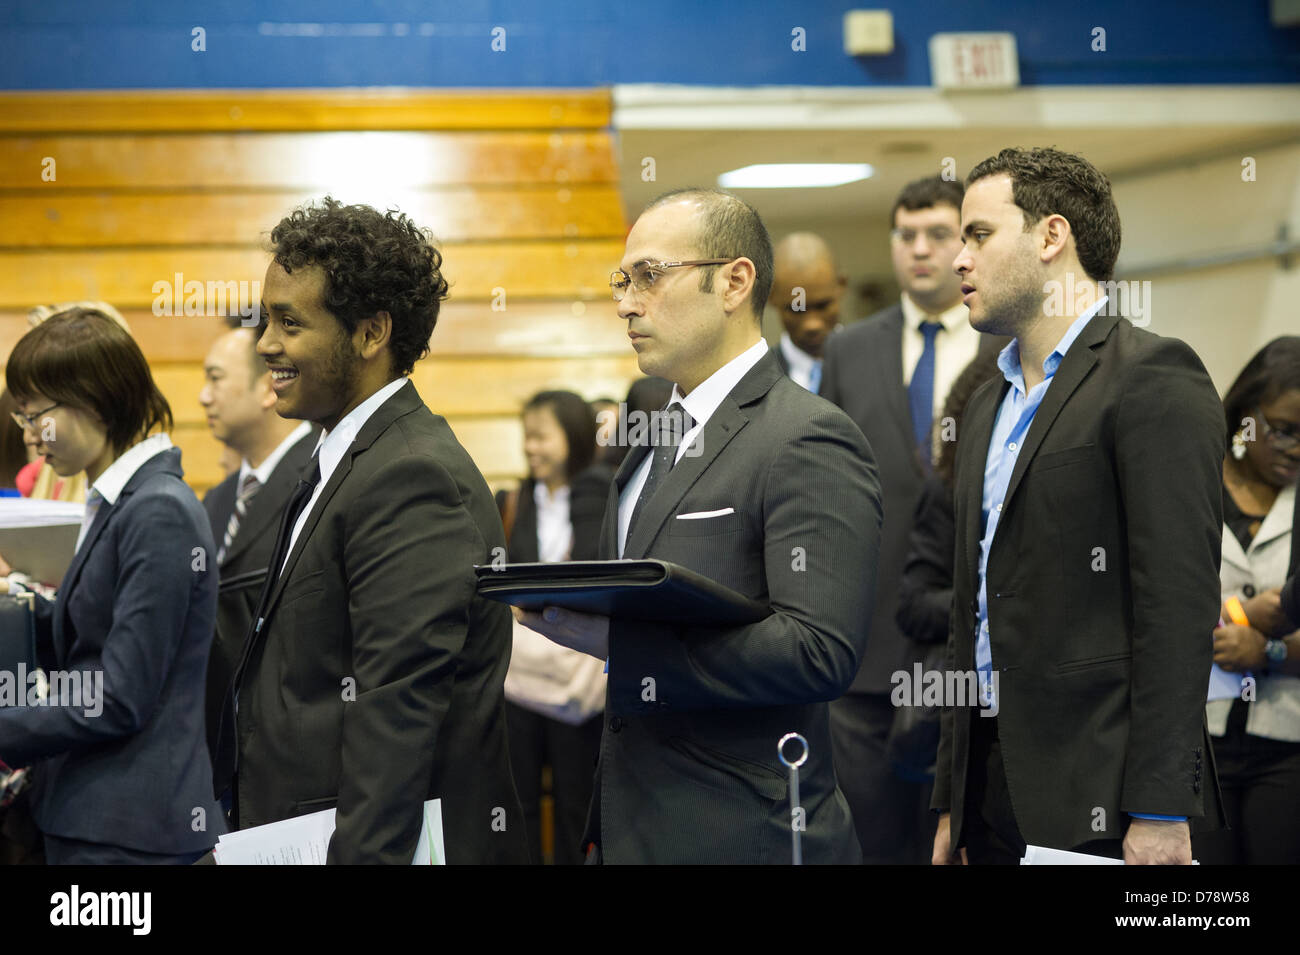 Job seekers attend an internship and job fair at Pace University in New York Stock Photo